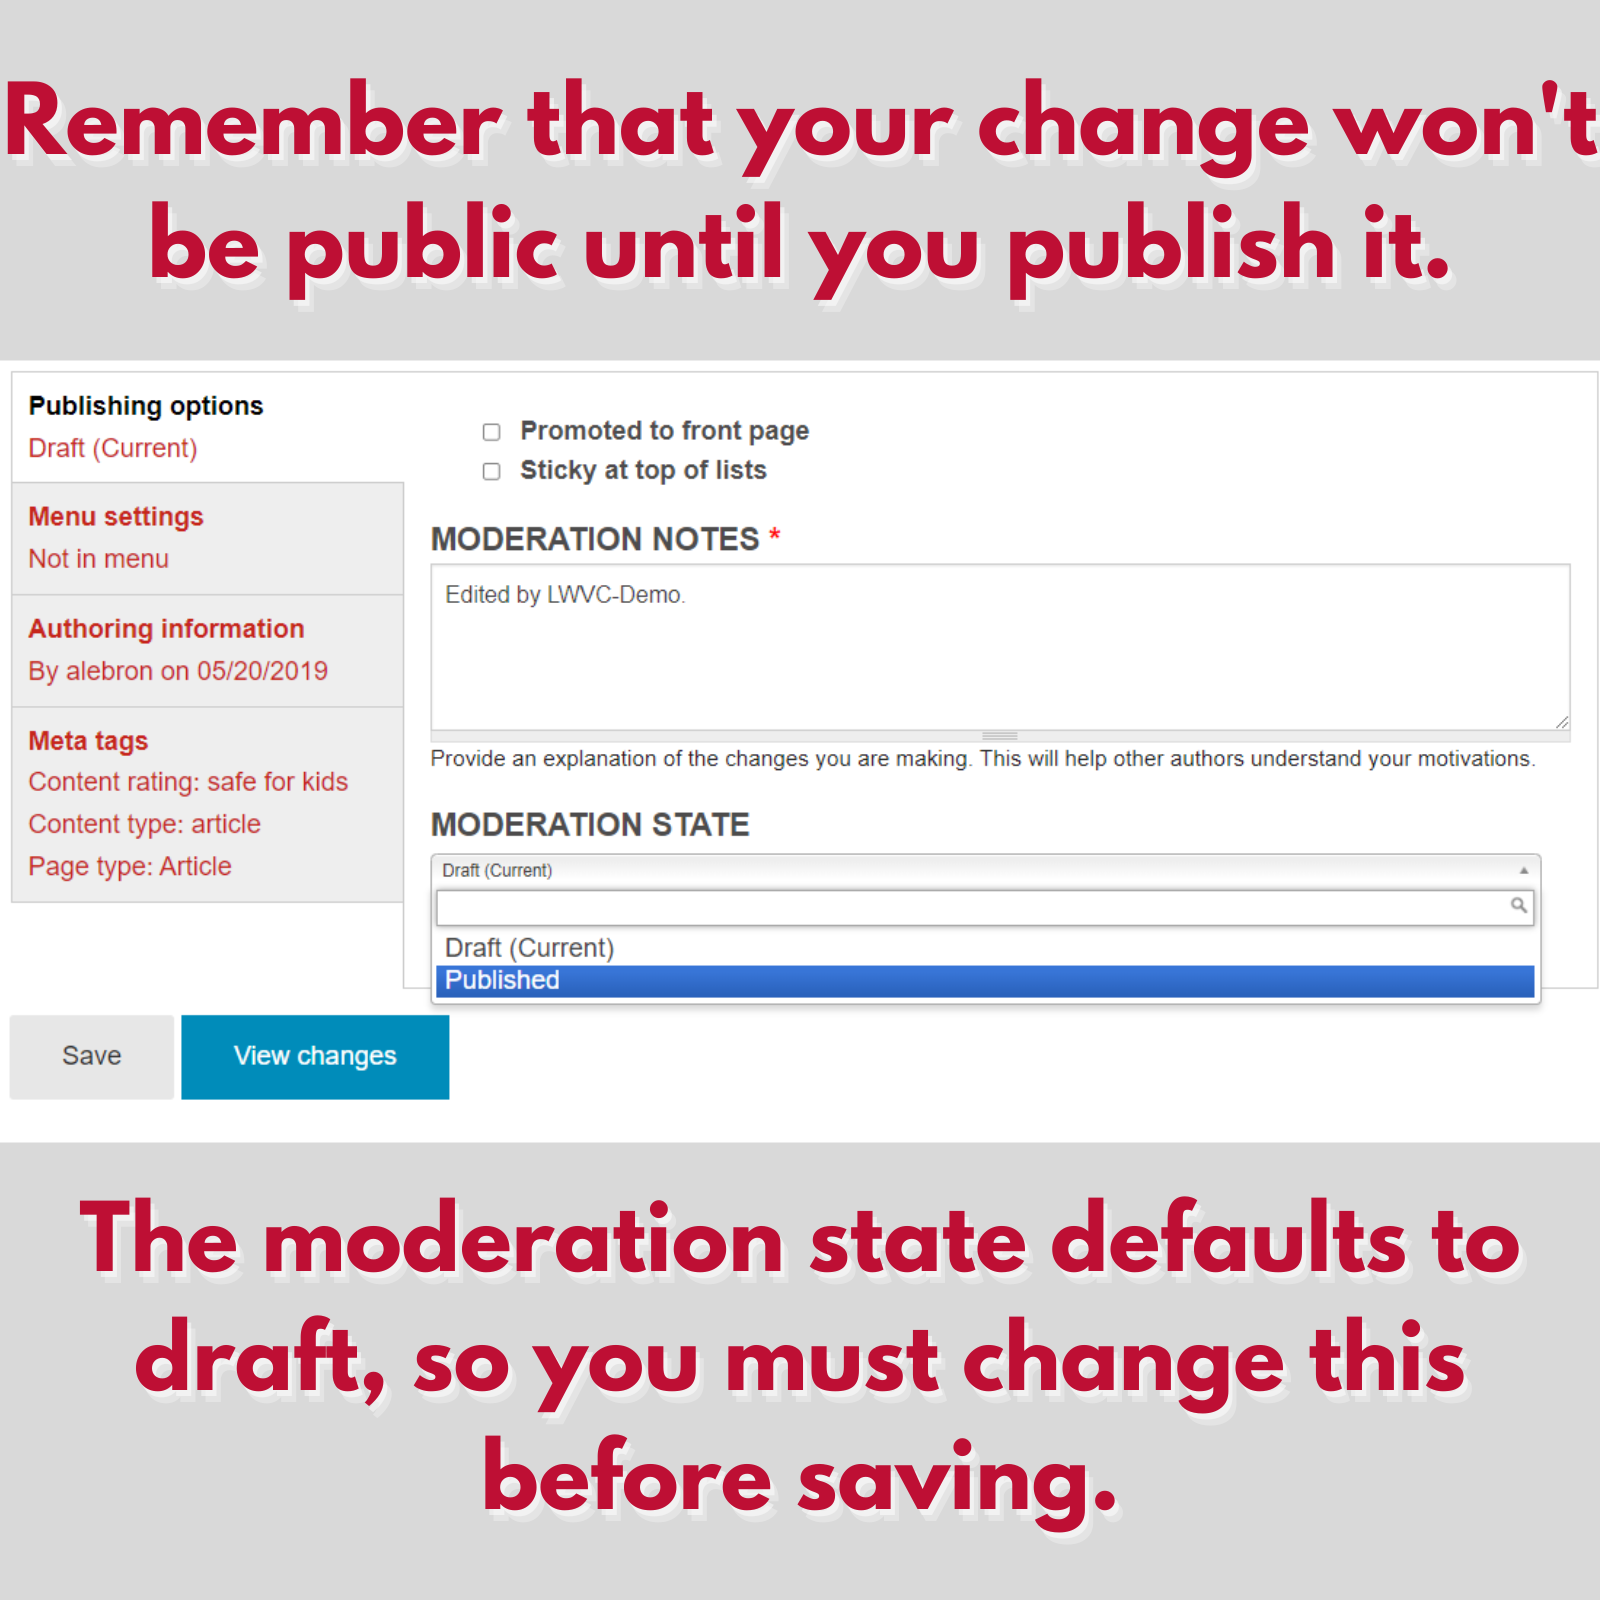 Remember that your change won't be publiuc until you publish it. The moderation state defaults to draft, so you must change this before saving.